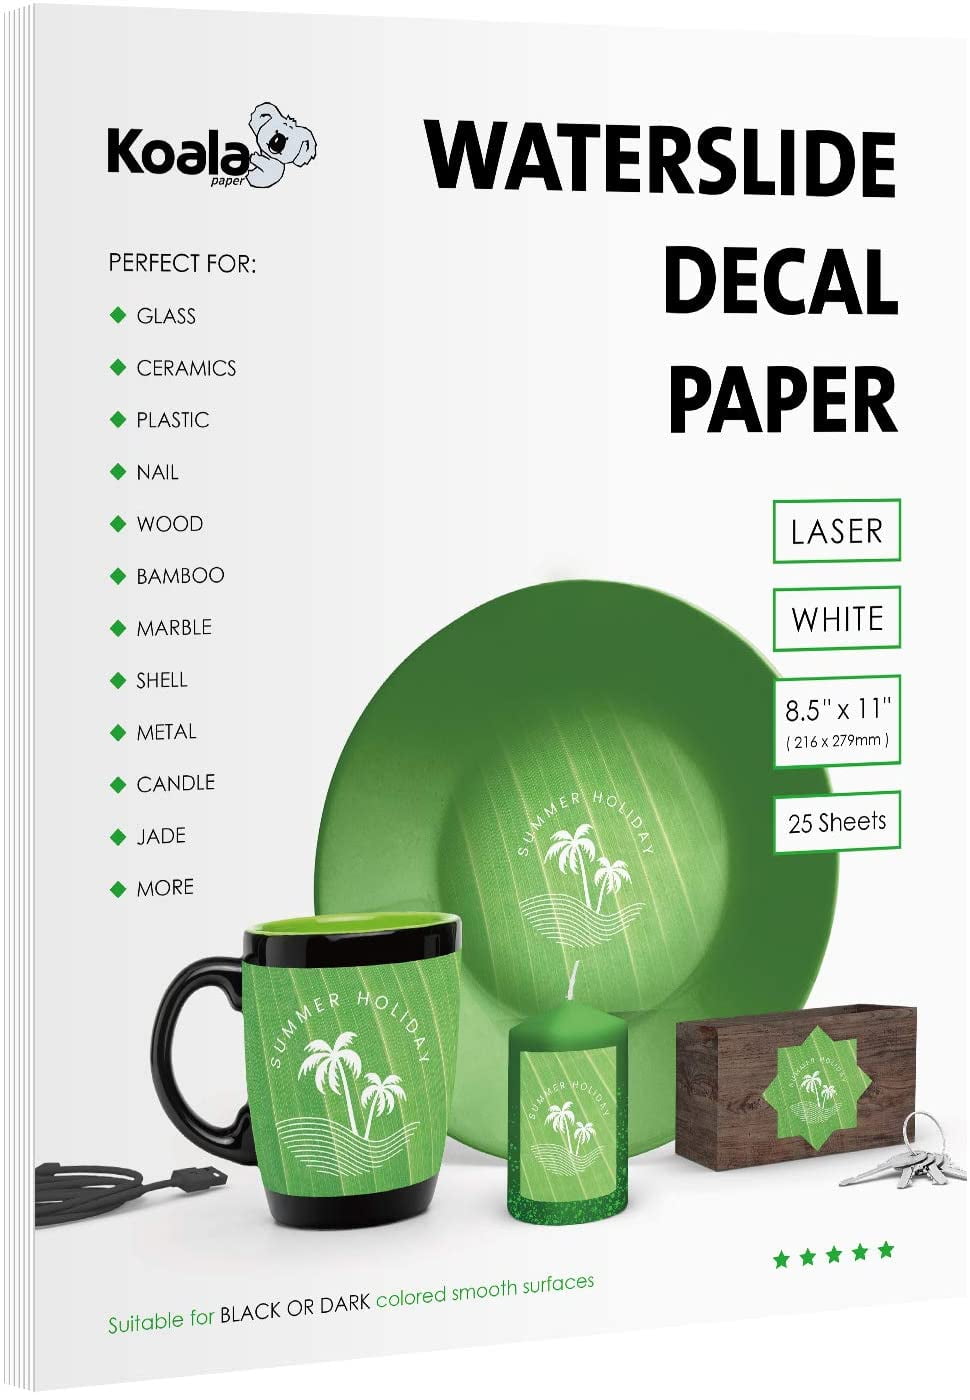 Waterslide decal paper laser CLEAR 10 Sheets Package 8.5 X 11 Inches 